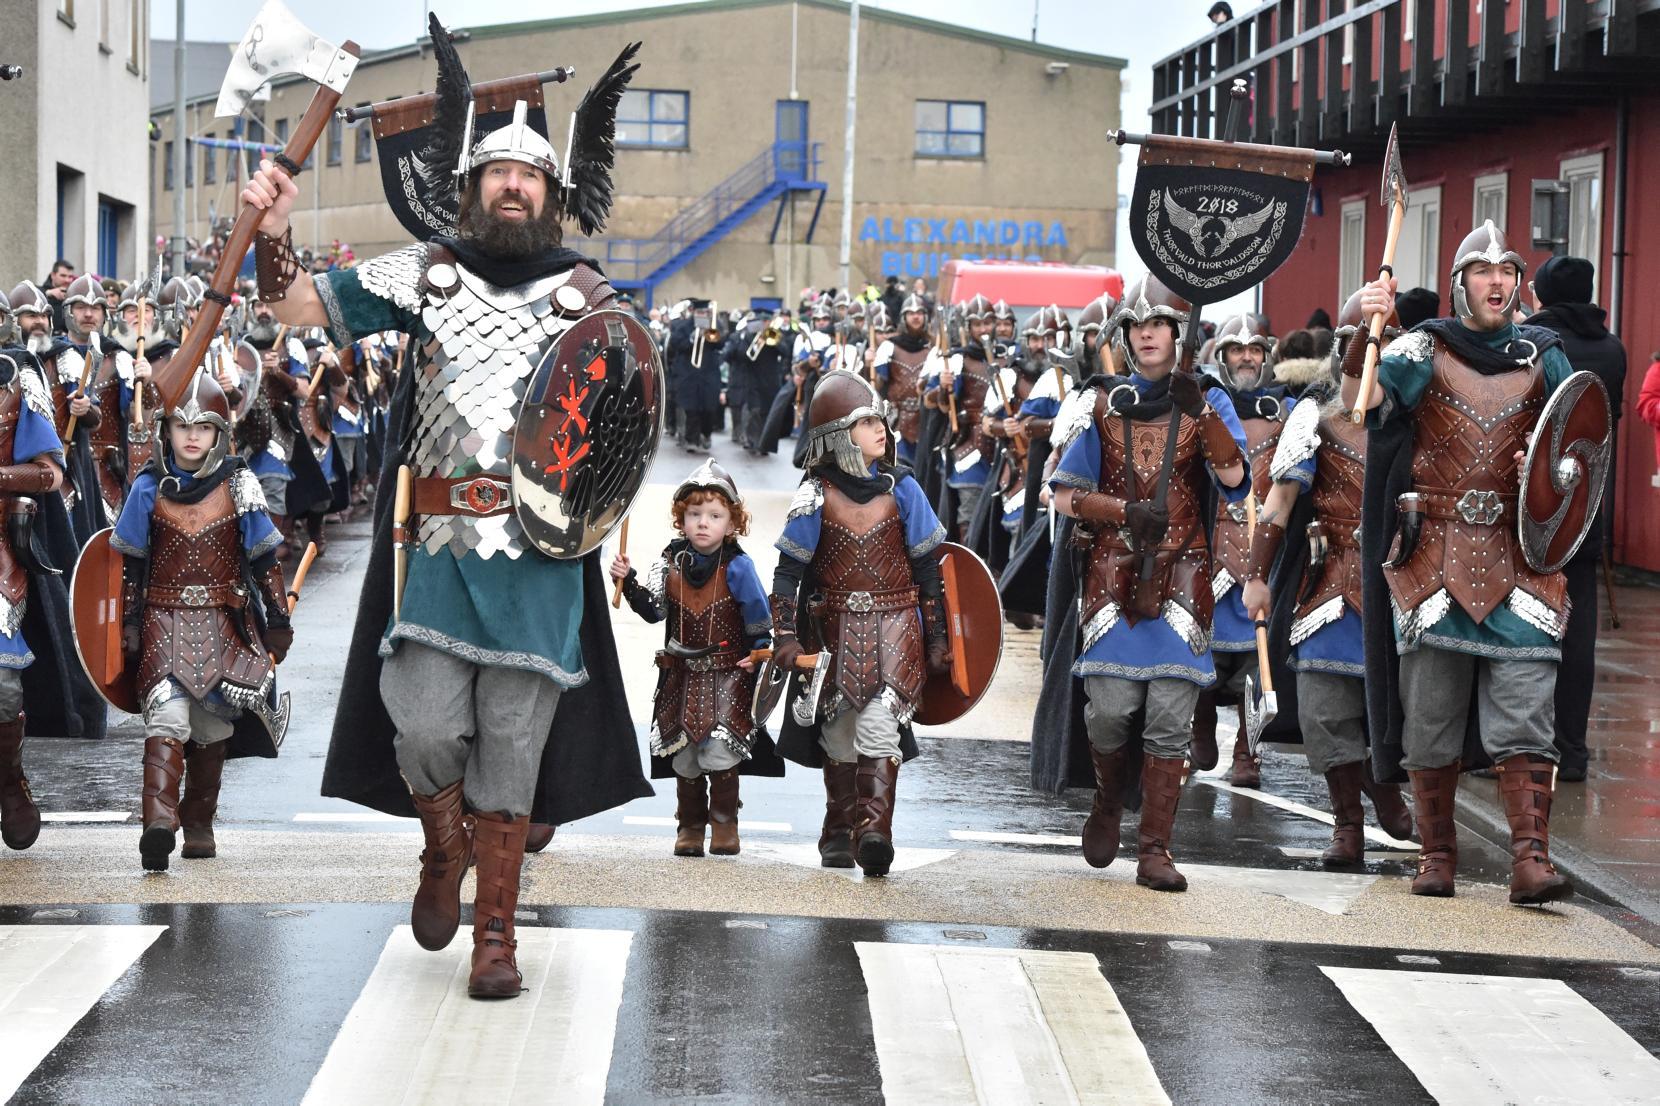 Junior Up Helly Aa to discuss inclusion of girls